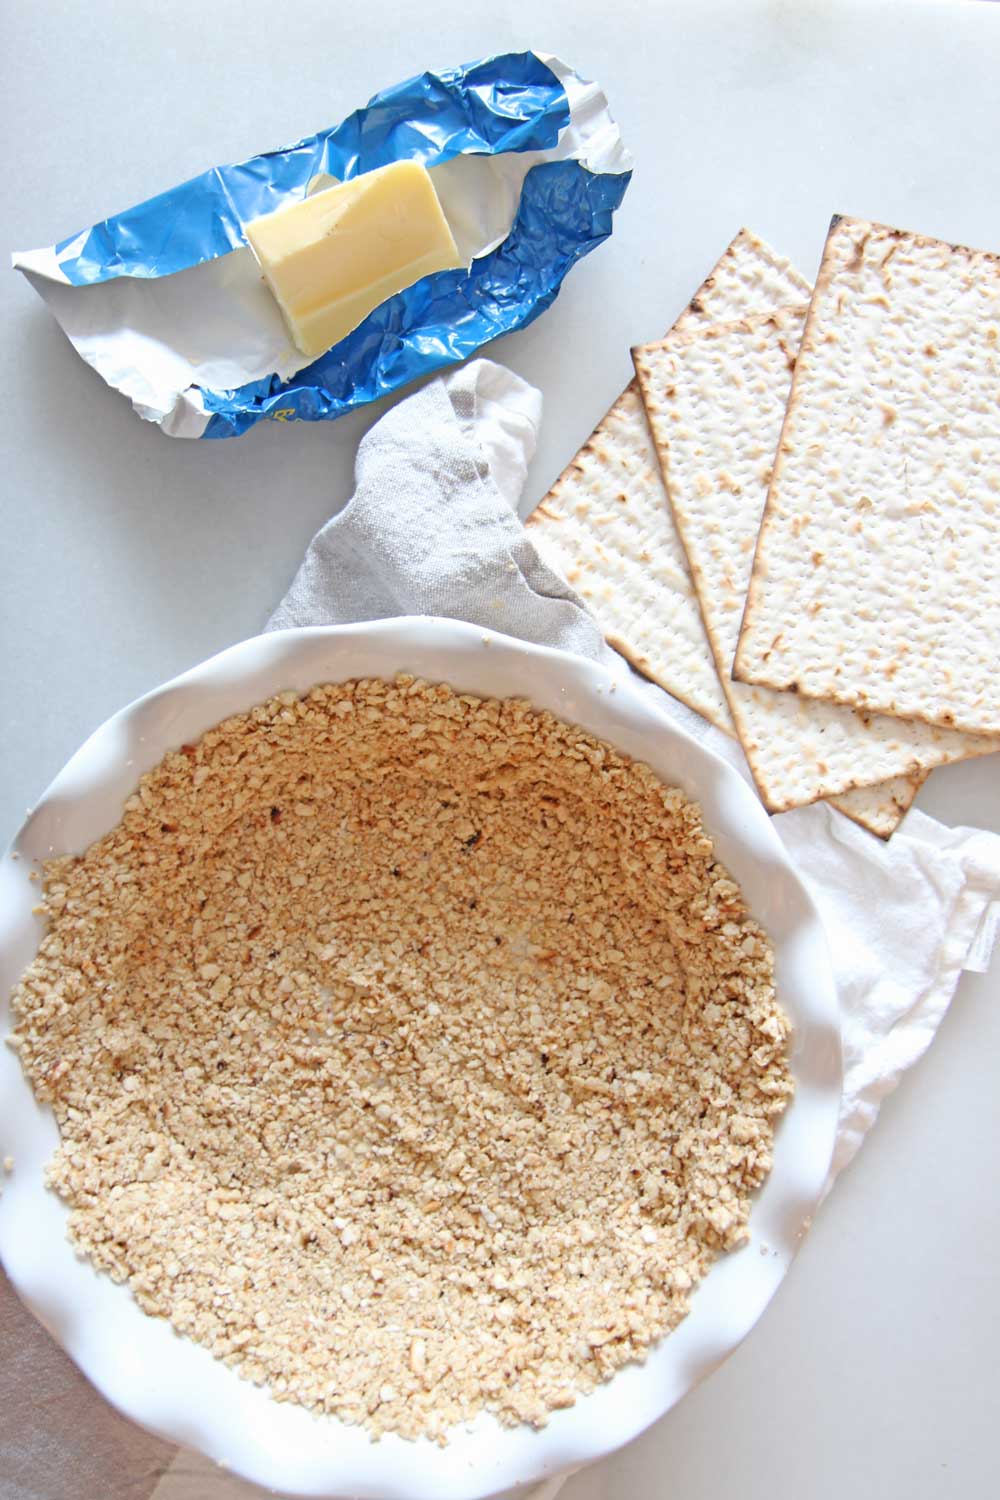 Matzo Pie Crust Recipe (3 Ingredients). The matzo, butter, and salt. So easy and great Passover Recipe! www.ChopHappy.com #Passover #Matzo #Passover Recipe